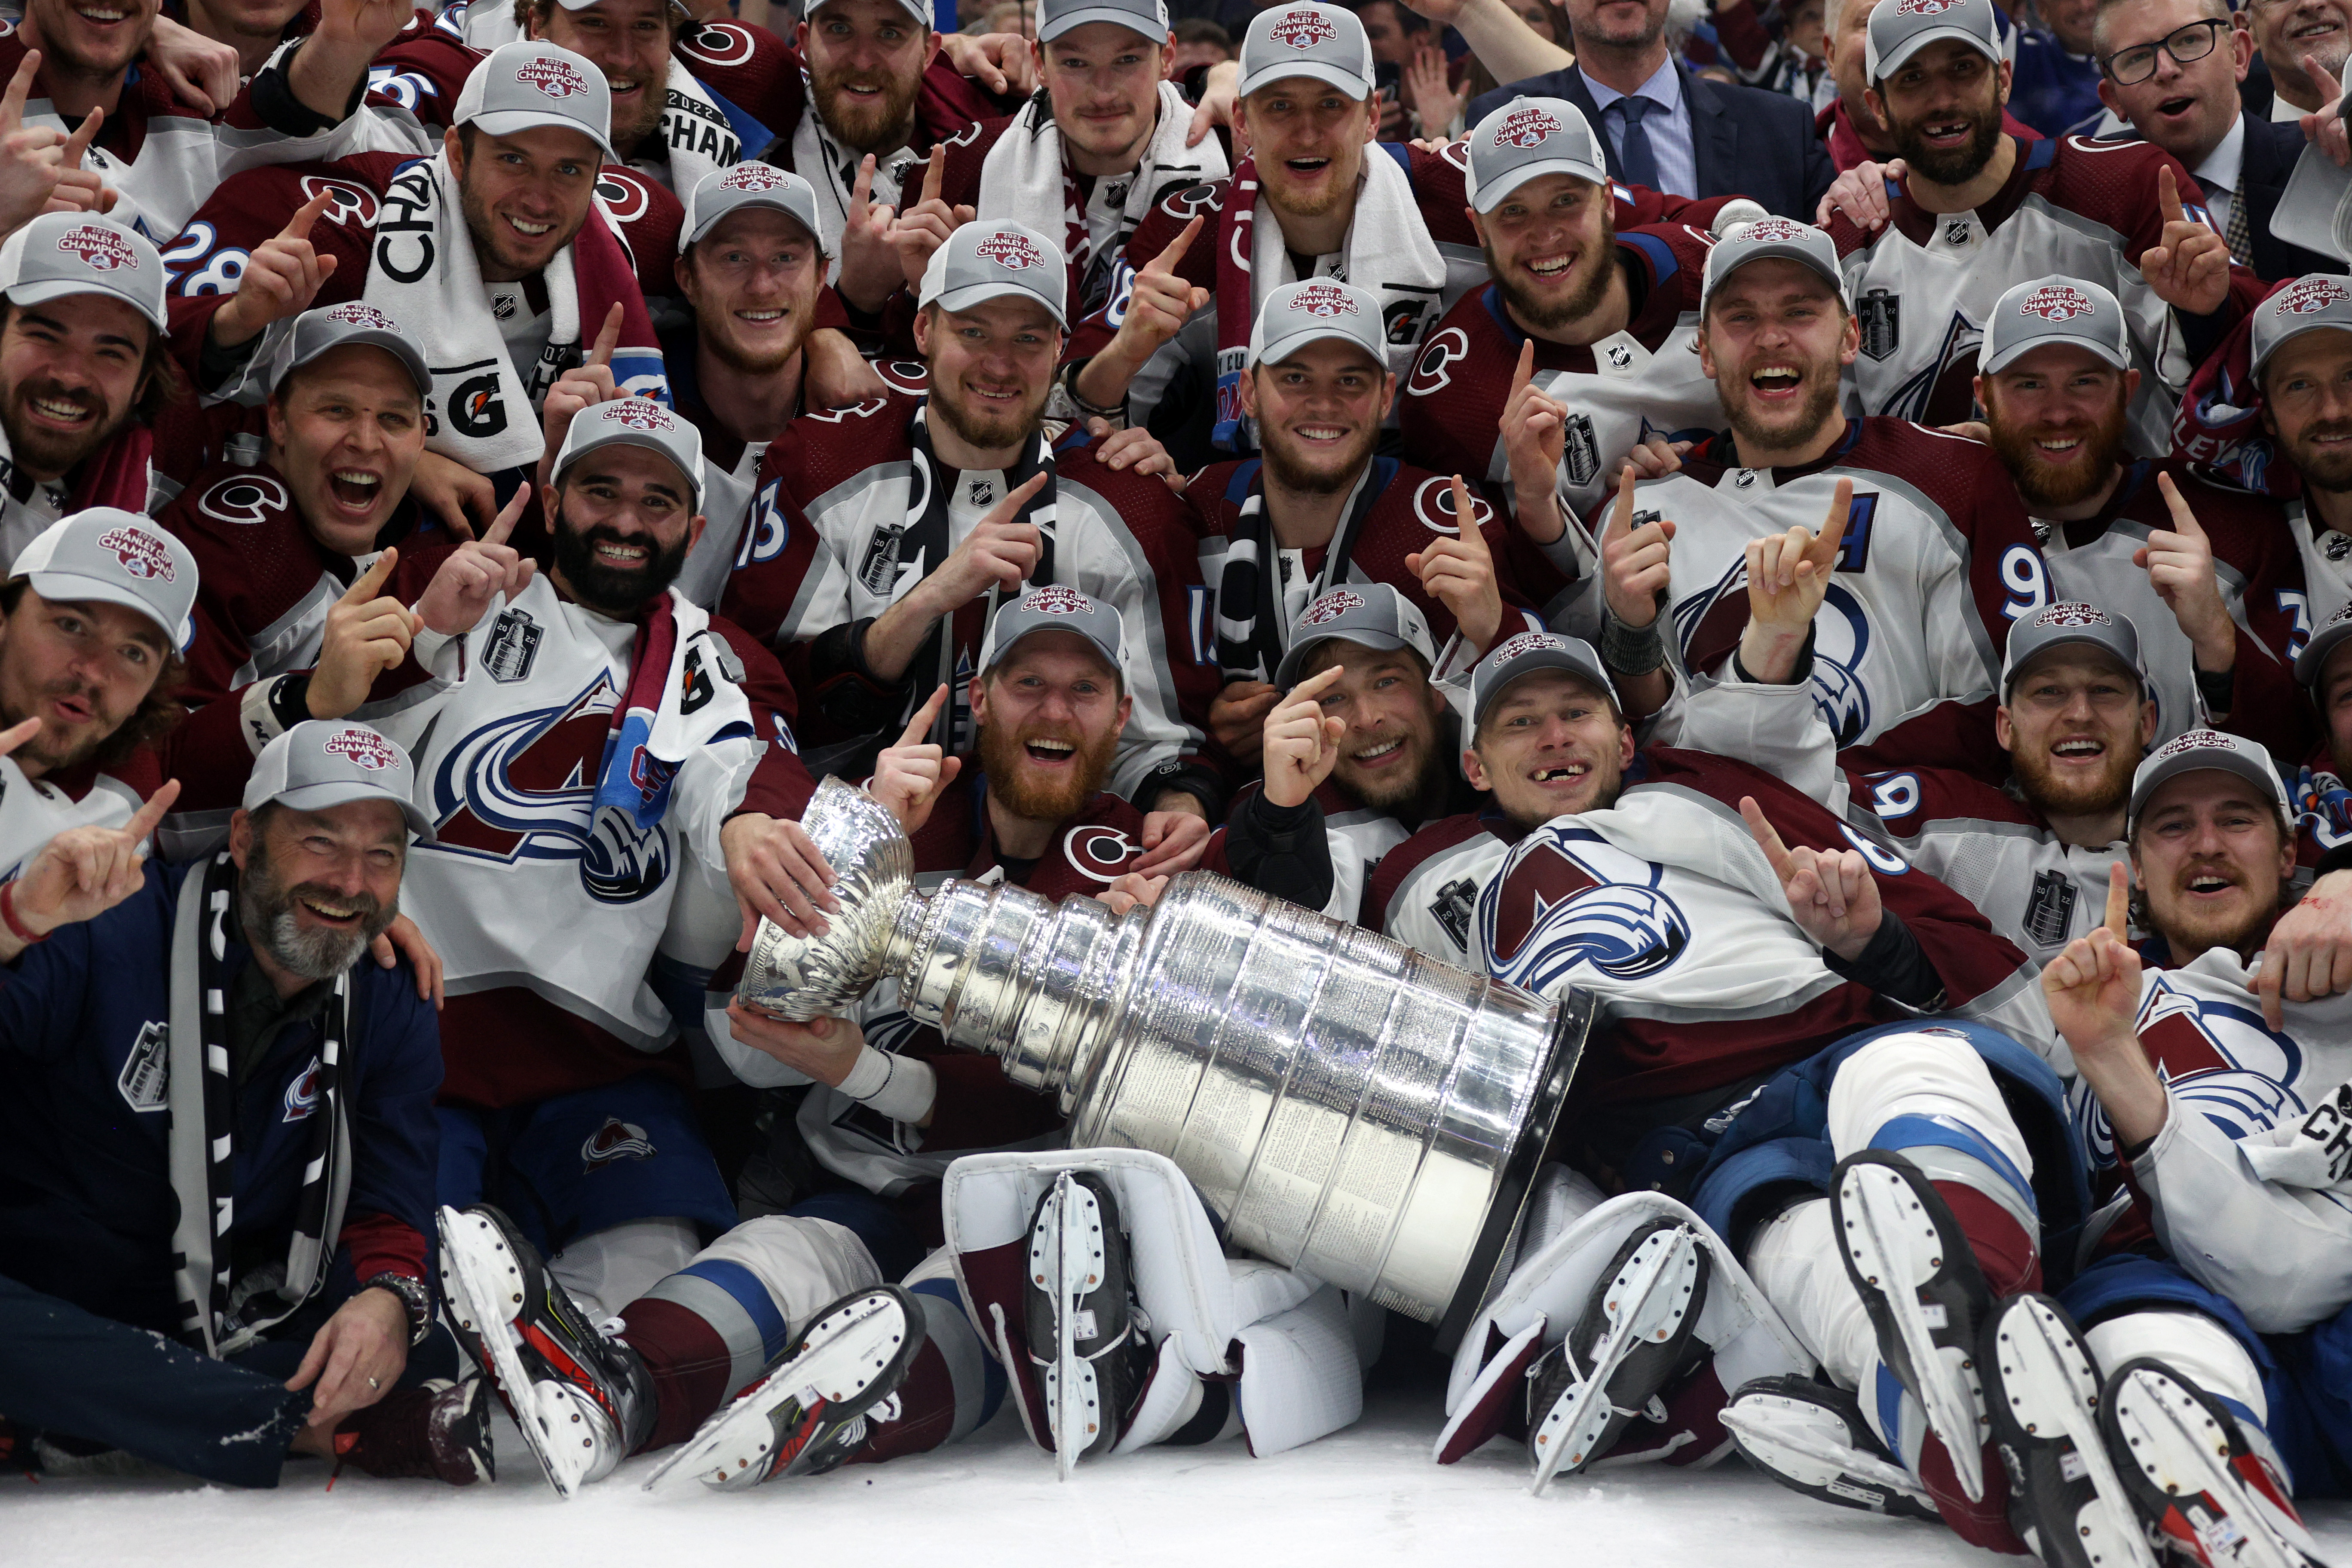 Where to buy Colorado Avalanche 2022 NHL Stanley Cup Championship